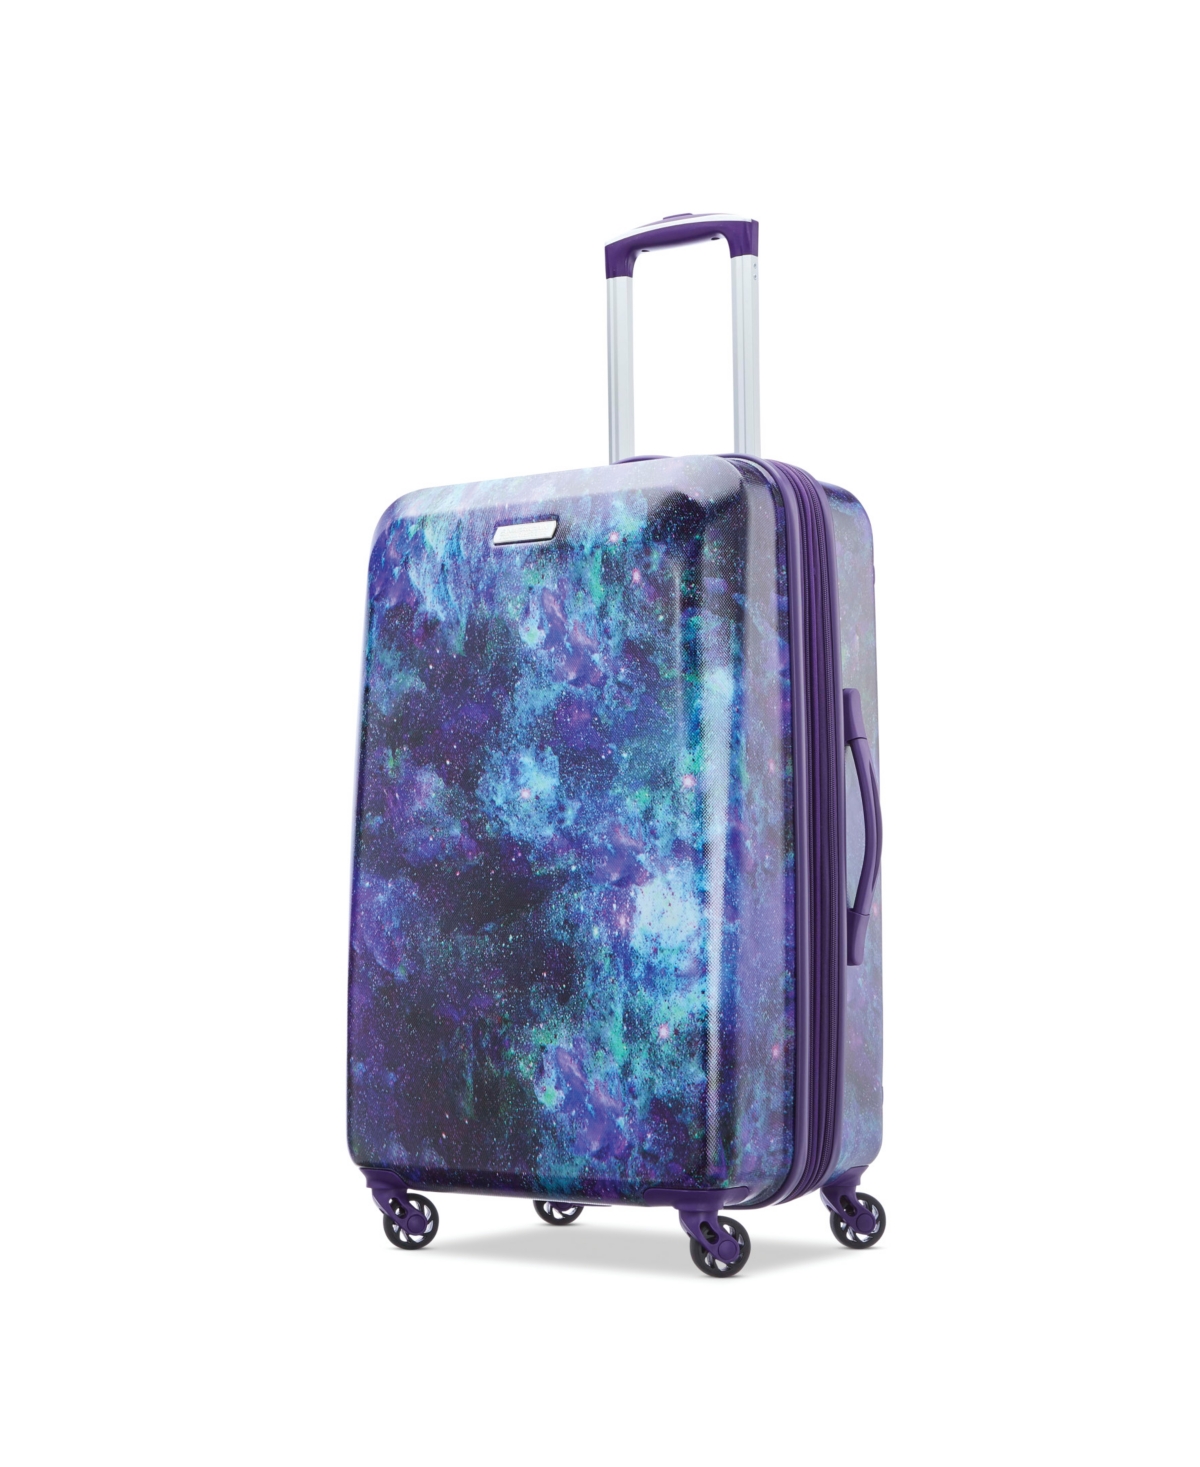 Moonlight 25" Expandable Hardside Spinner Suitcase - Cosmos